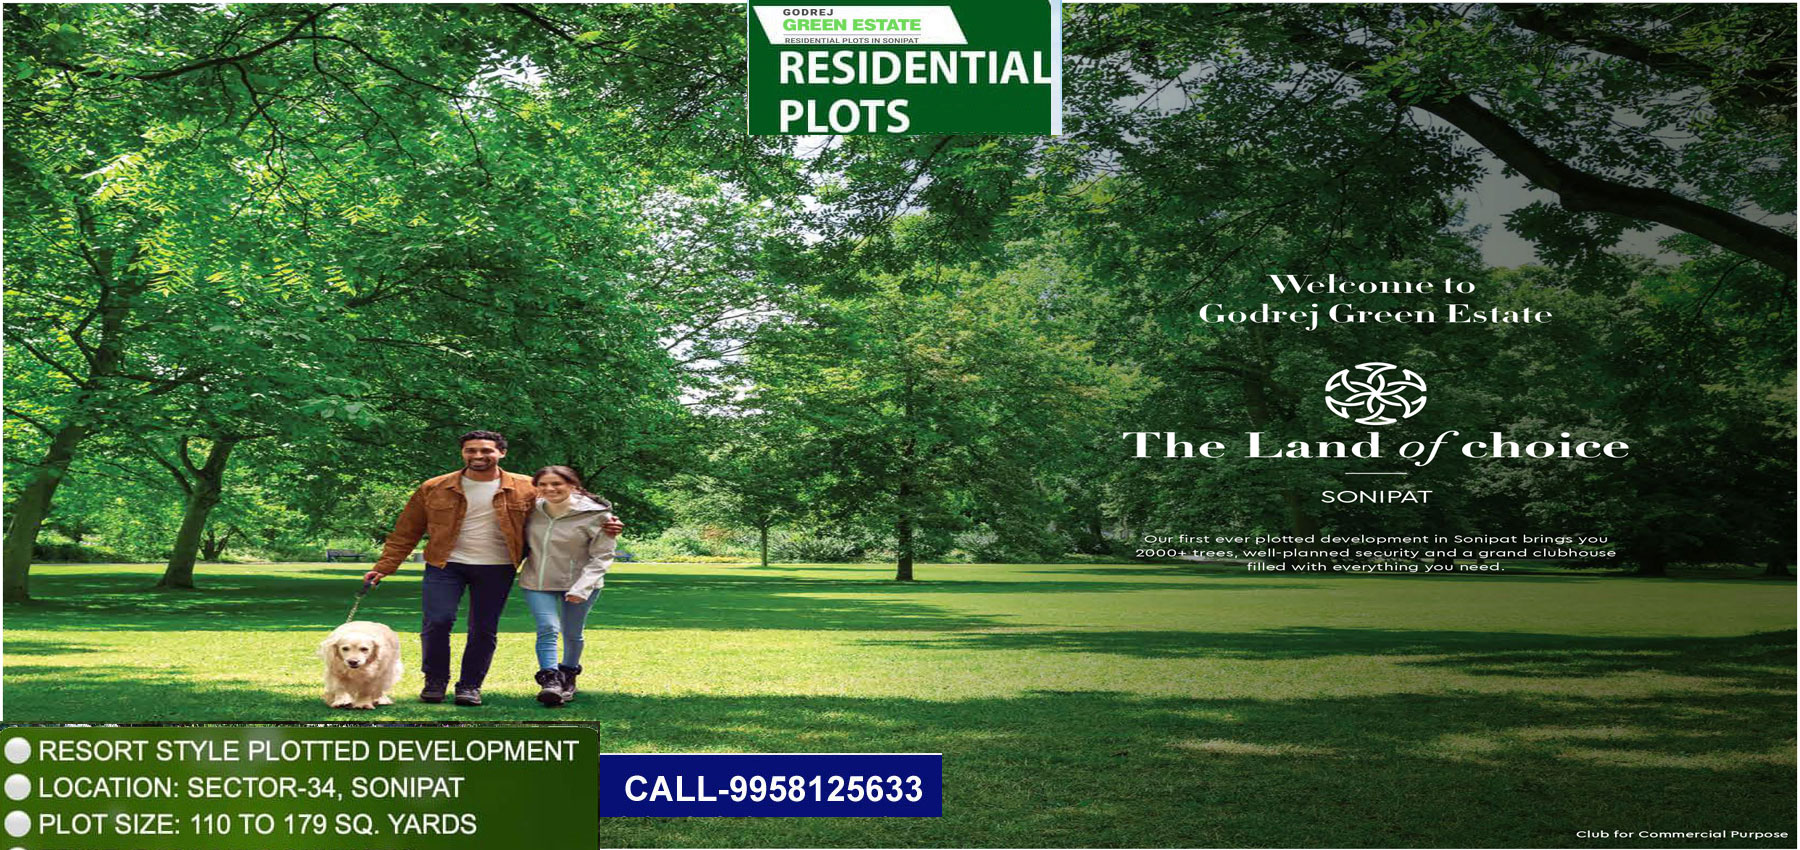 Godrej Green Estate– Premium Luxury Plots What Do People Have To Say